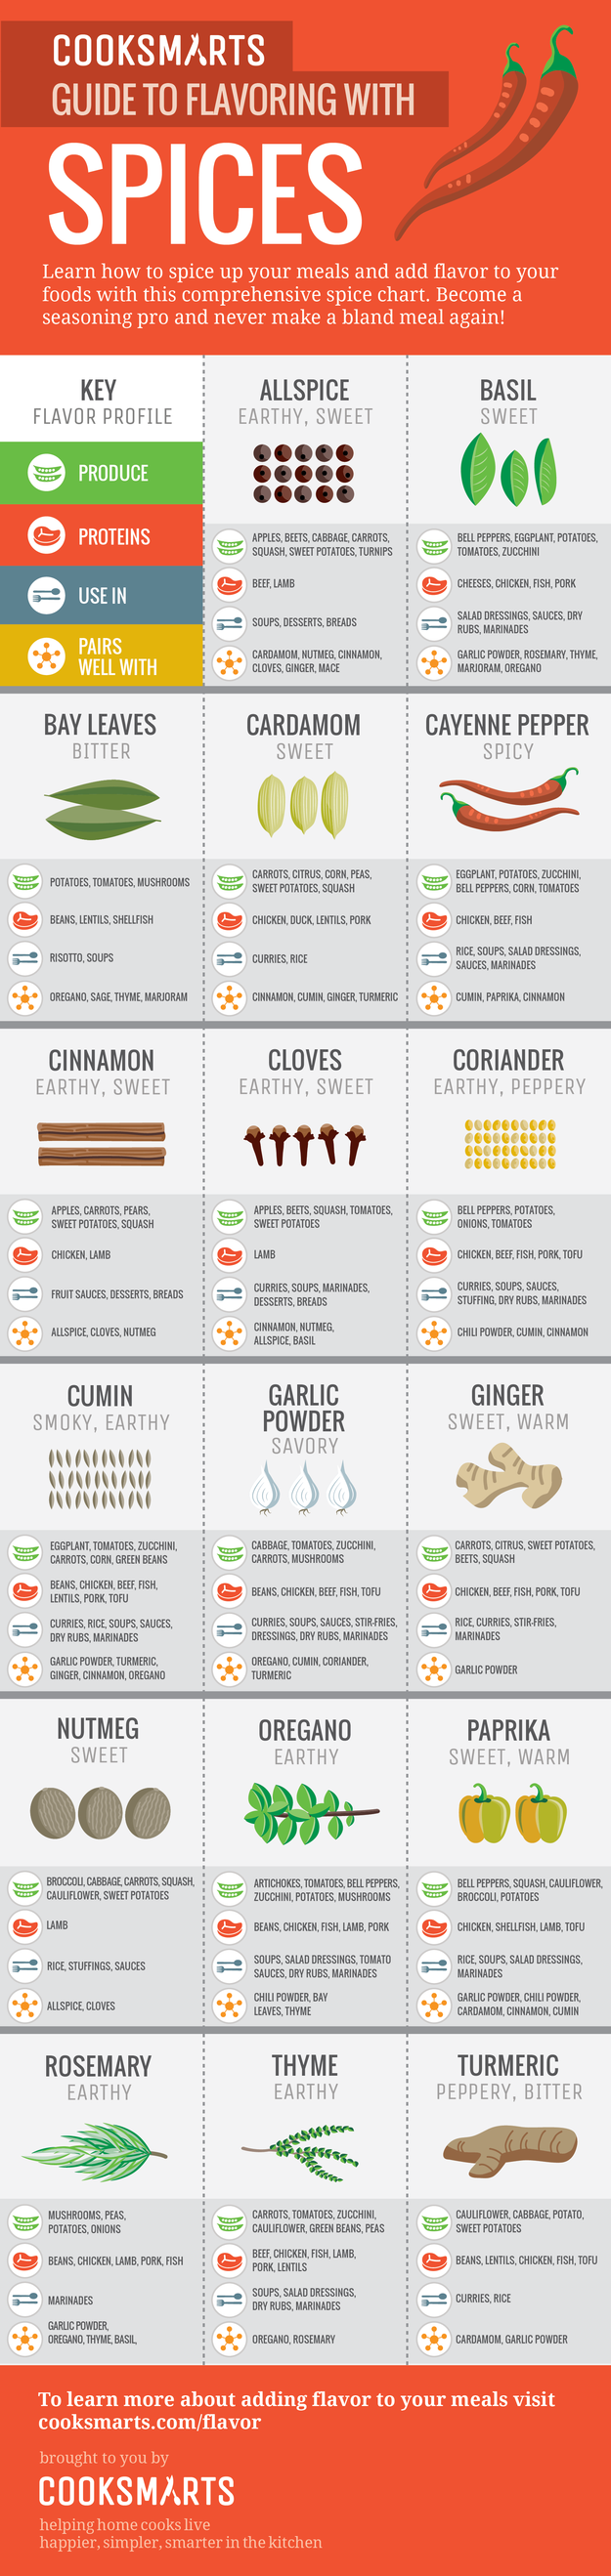 guide to flavoring with spices